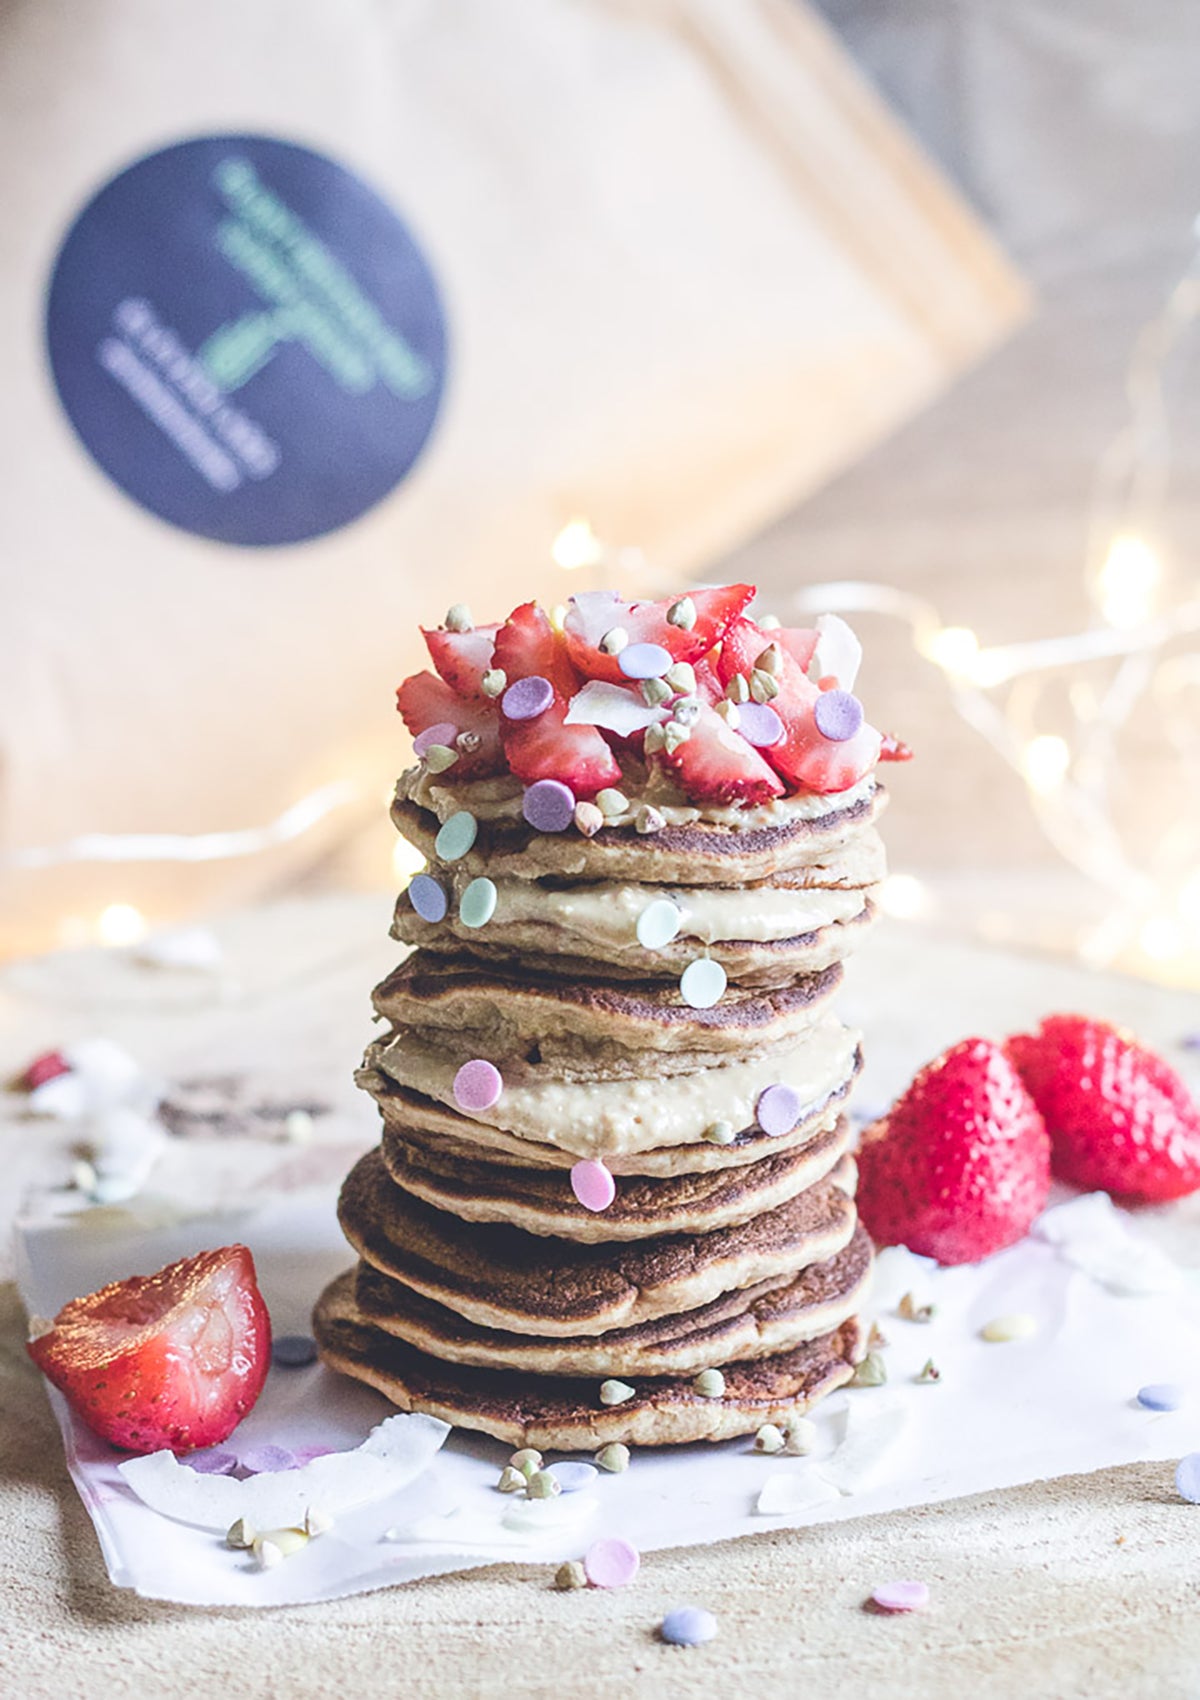 elevenlabs nourishing plant protein pancakes stacked with cashew cream and strawberries